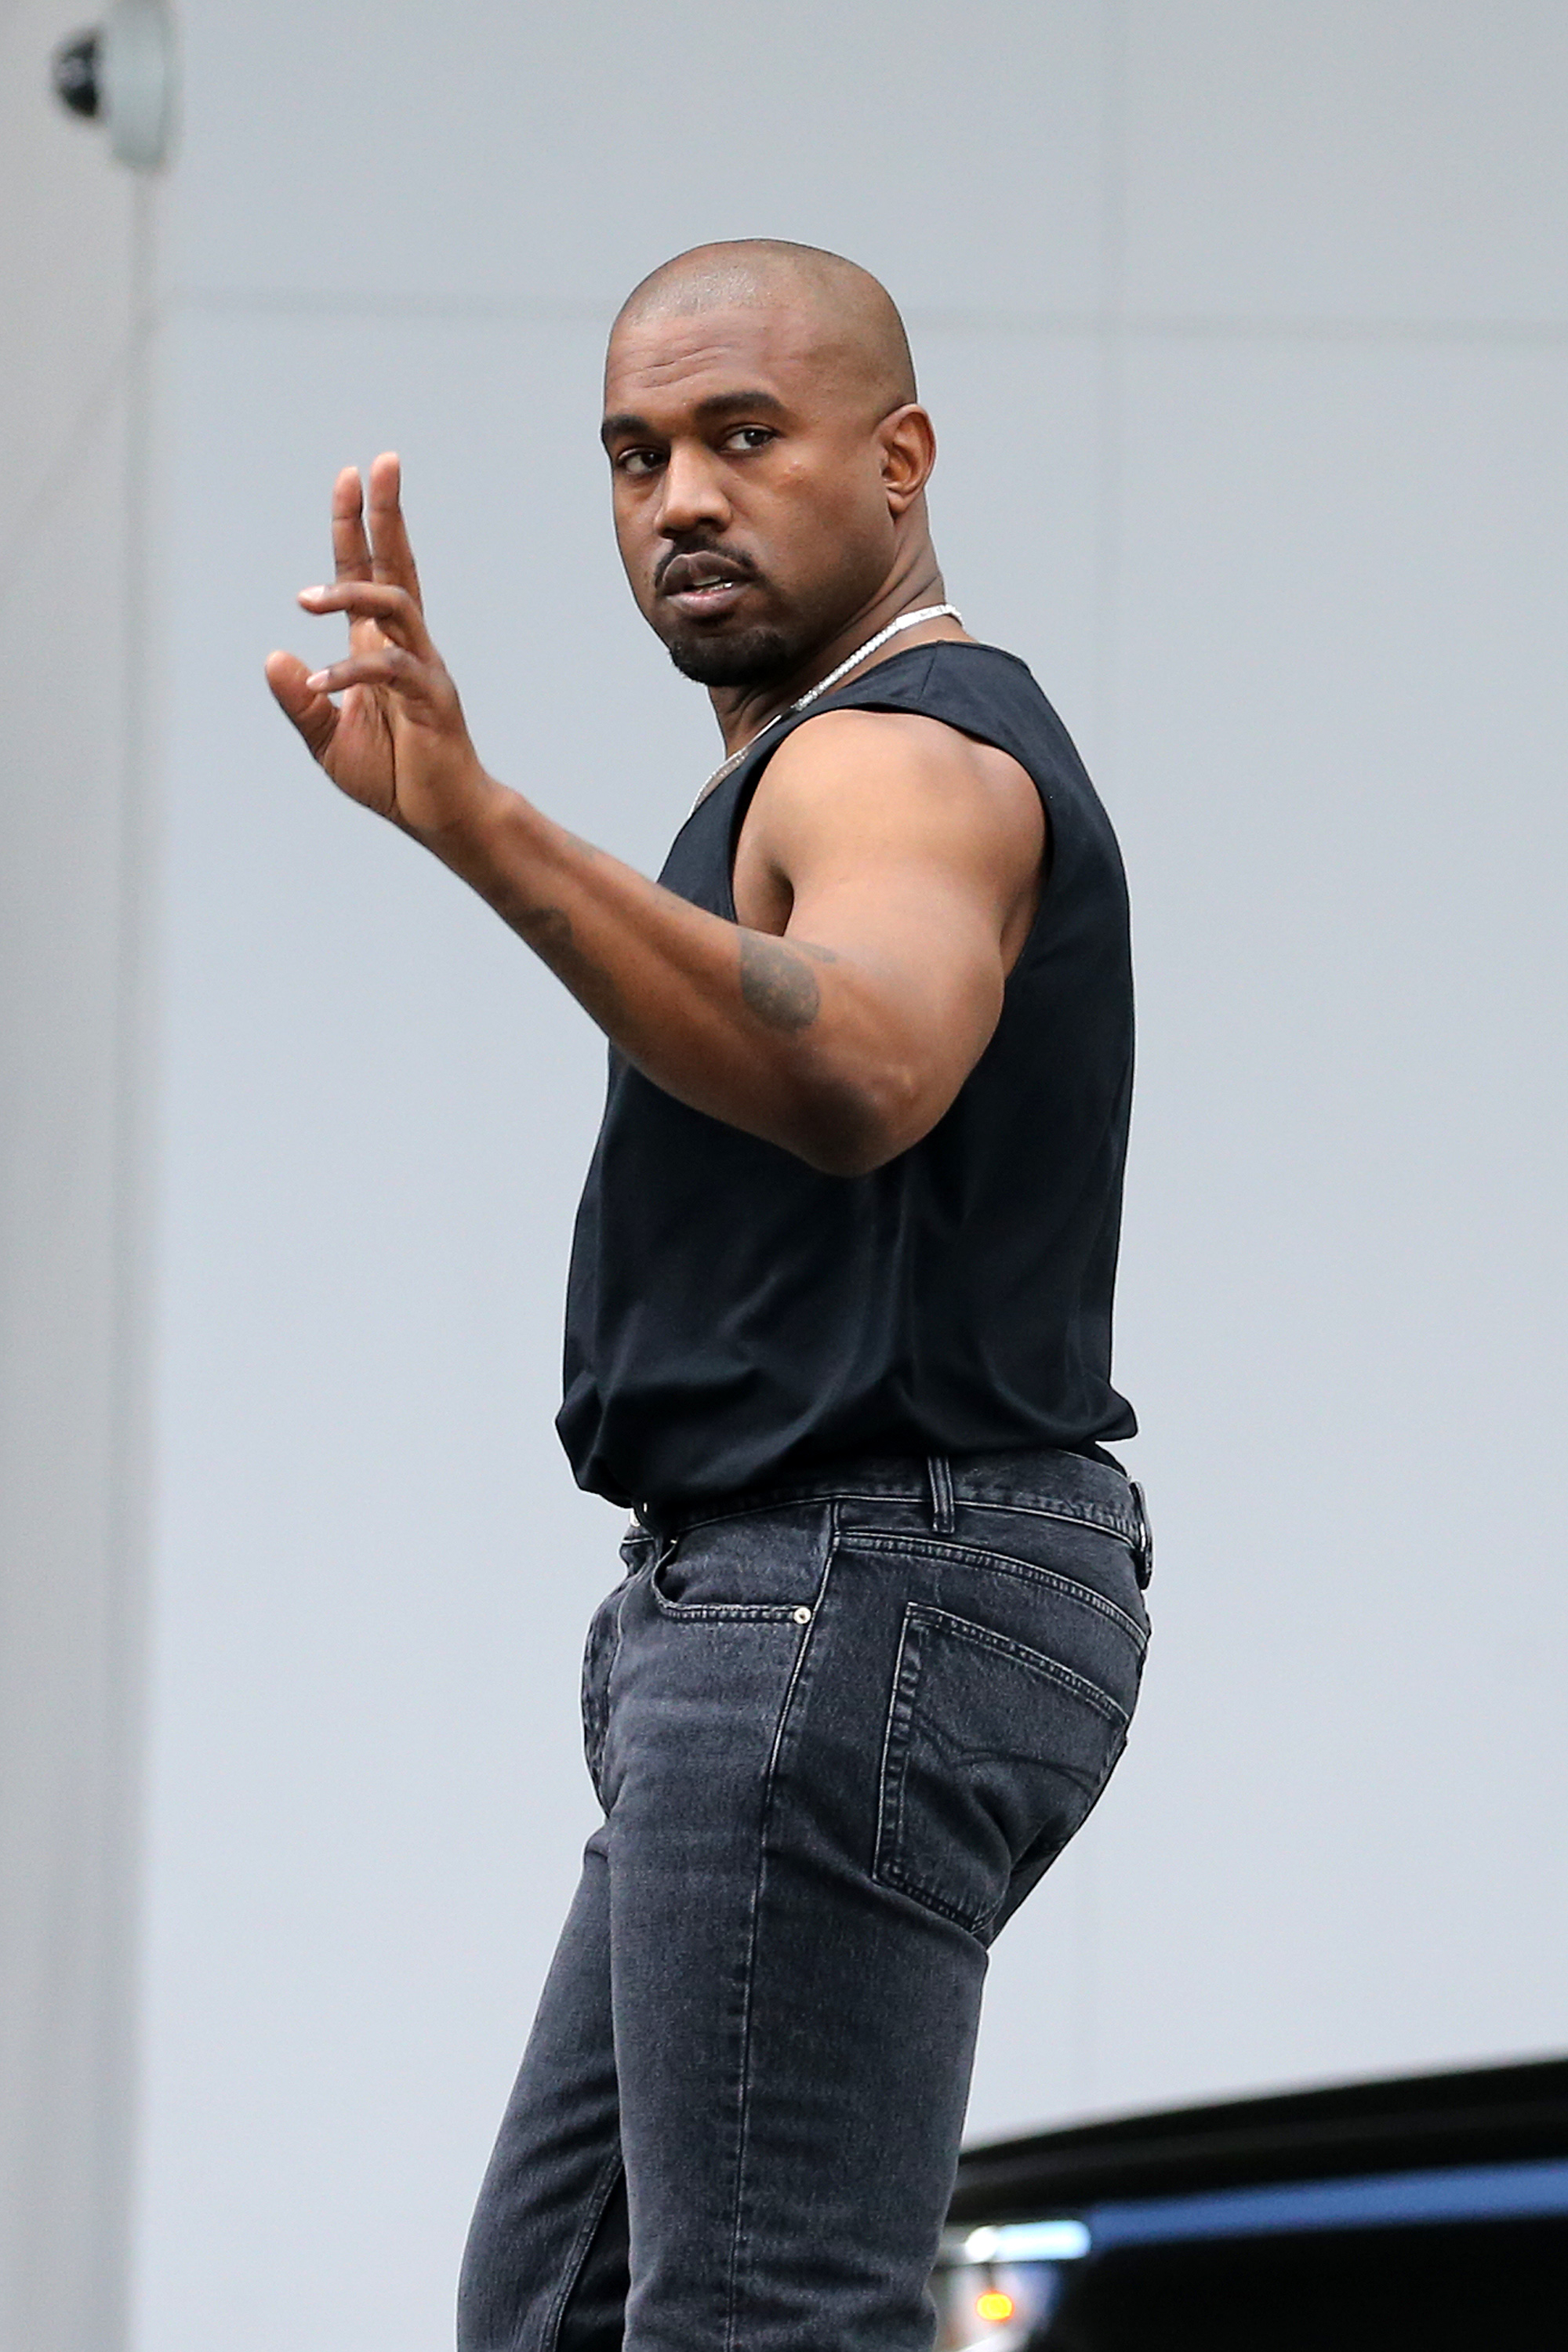 Close-up of Ye in jeans and a sleeveless top, waving